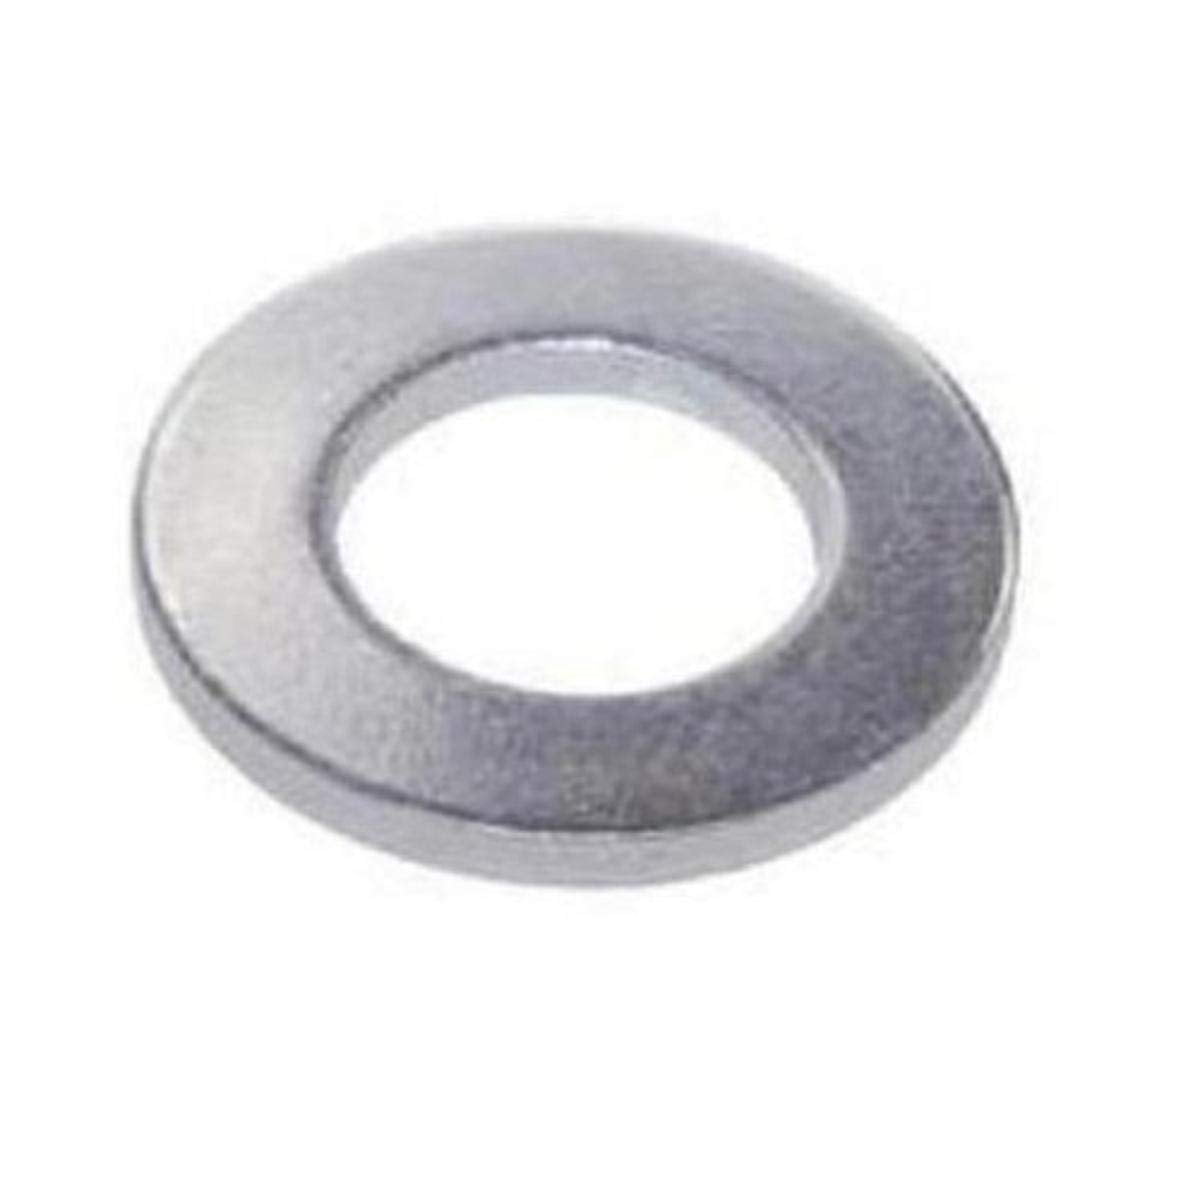 1-3/8" ID SAE High Strength Flat Washers Pack of 5 